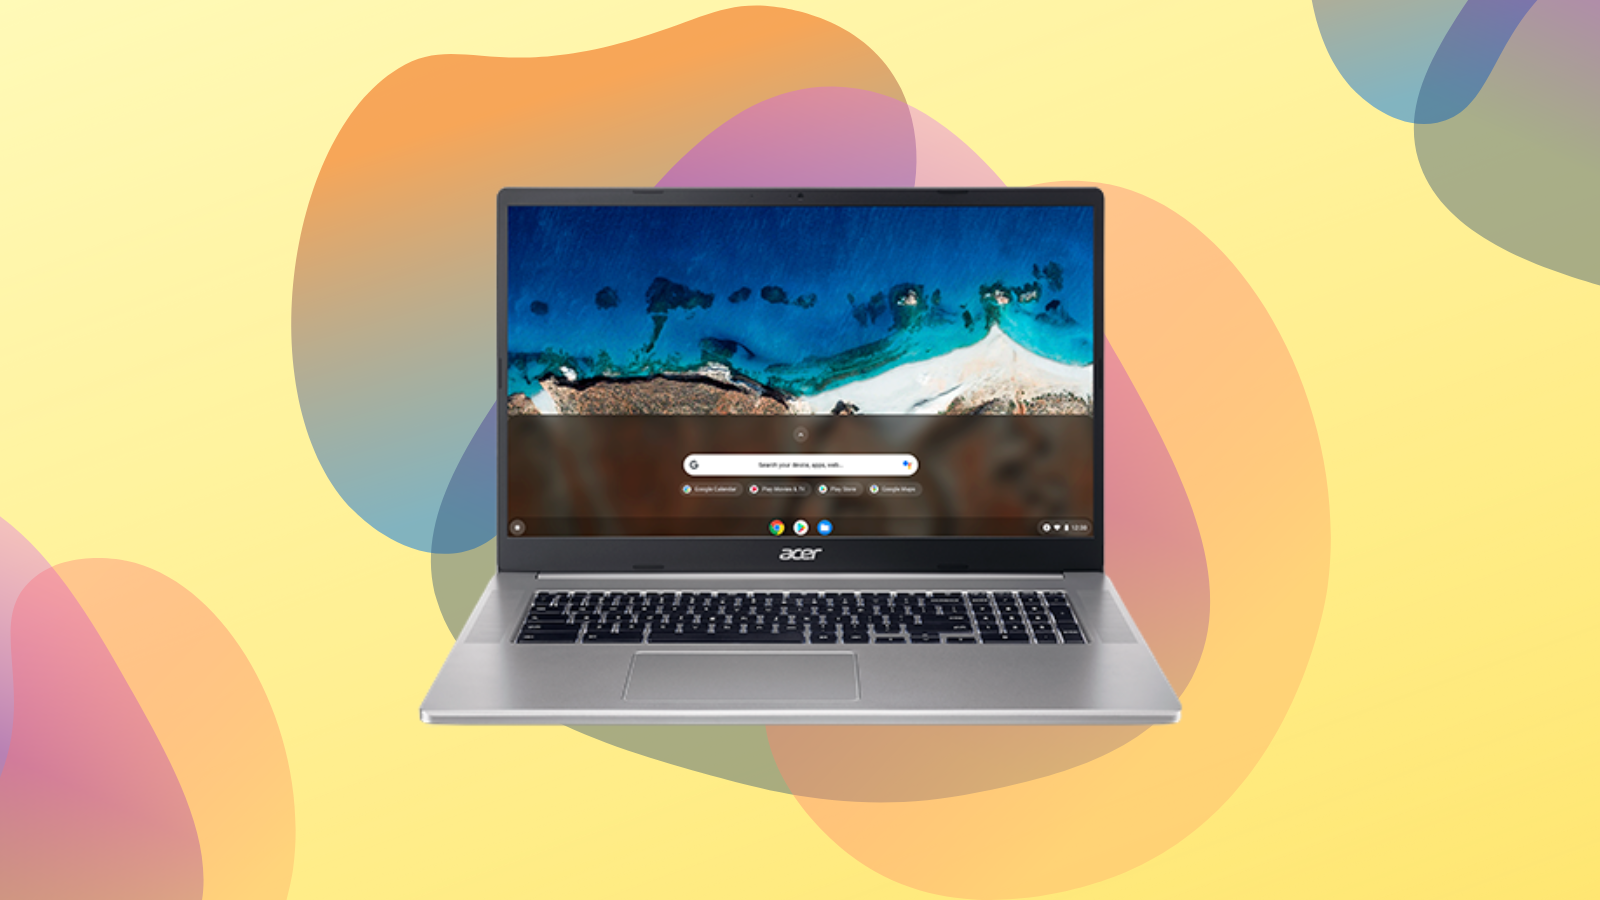 acer chromebook 317 with colorful background